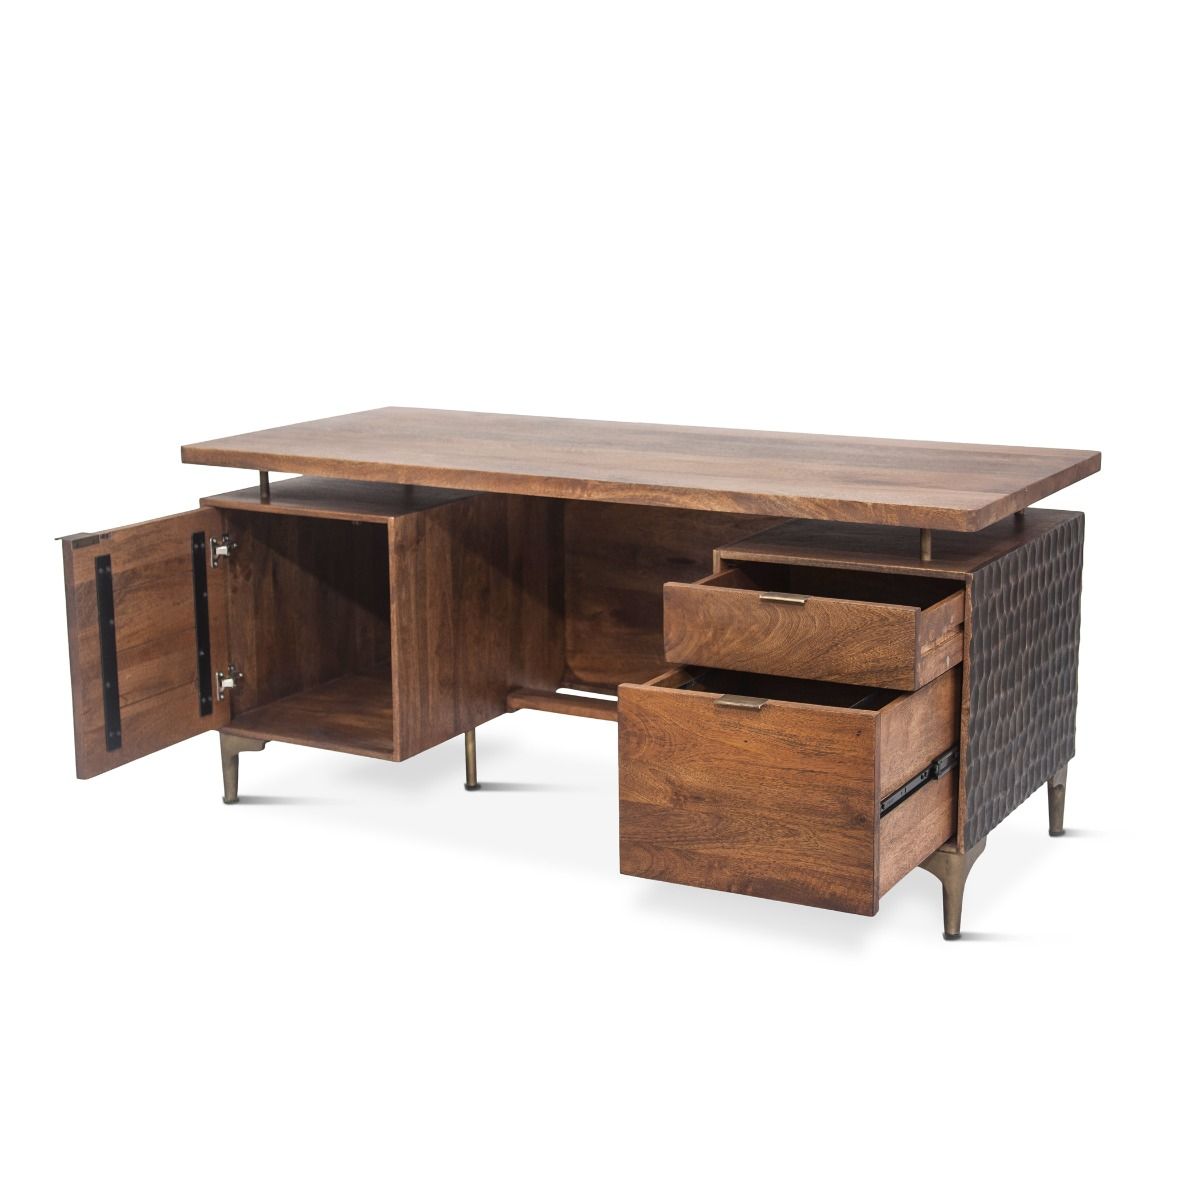 Mango Wood and Reclaimed Iron Industrial Desk - Furniture on Main